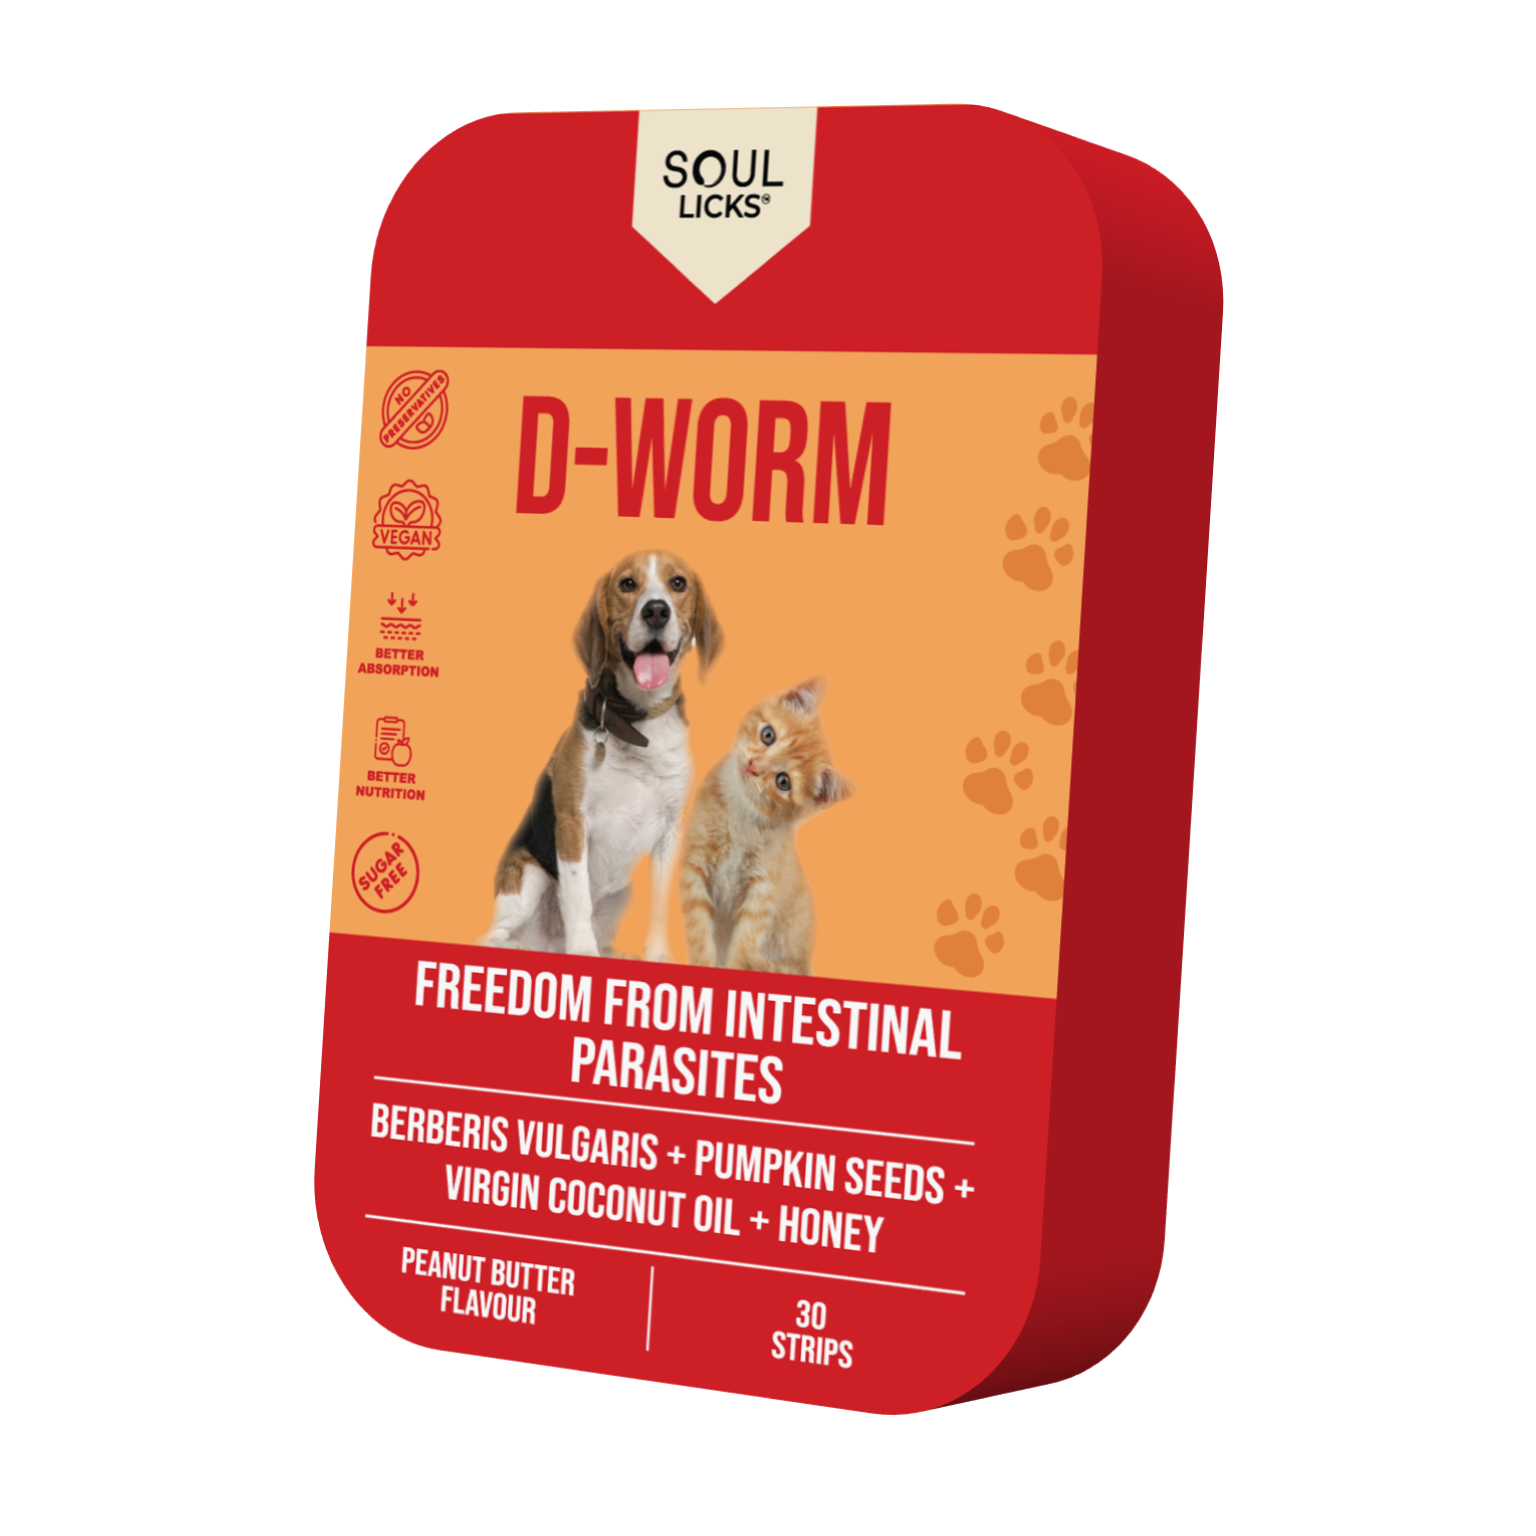 D-Worm - Protect your pet from parasites